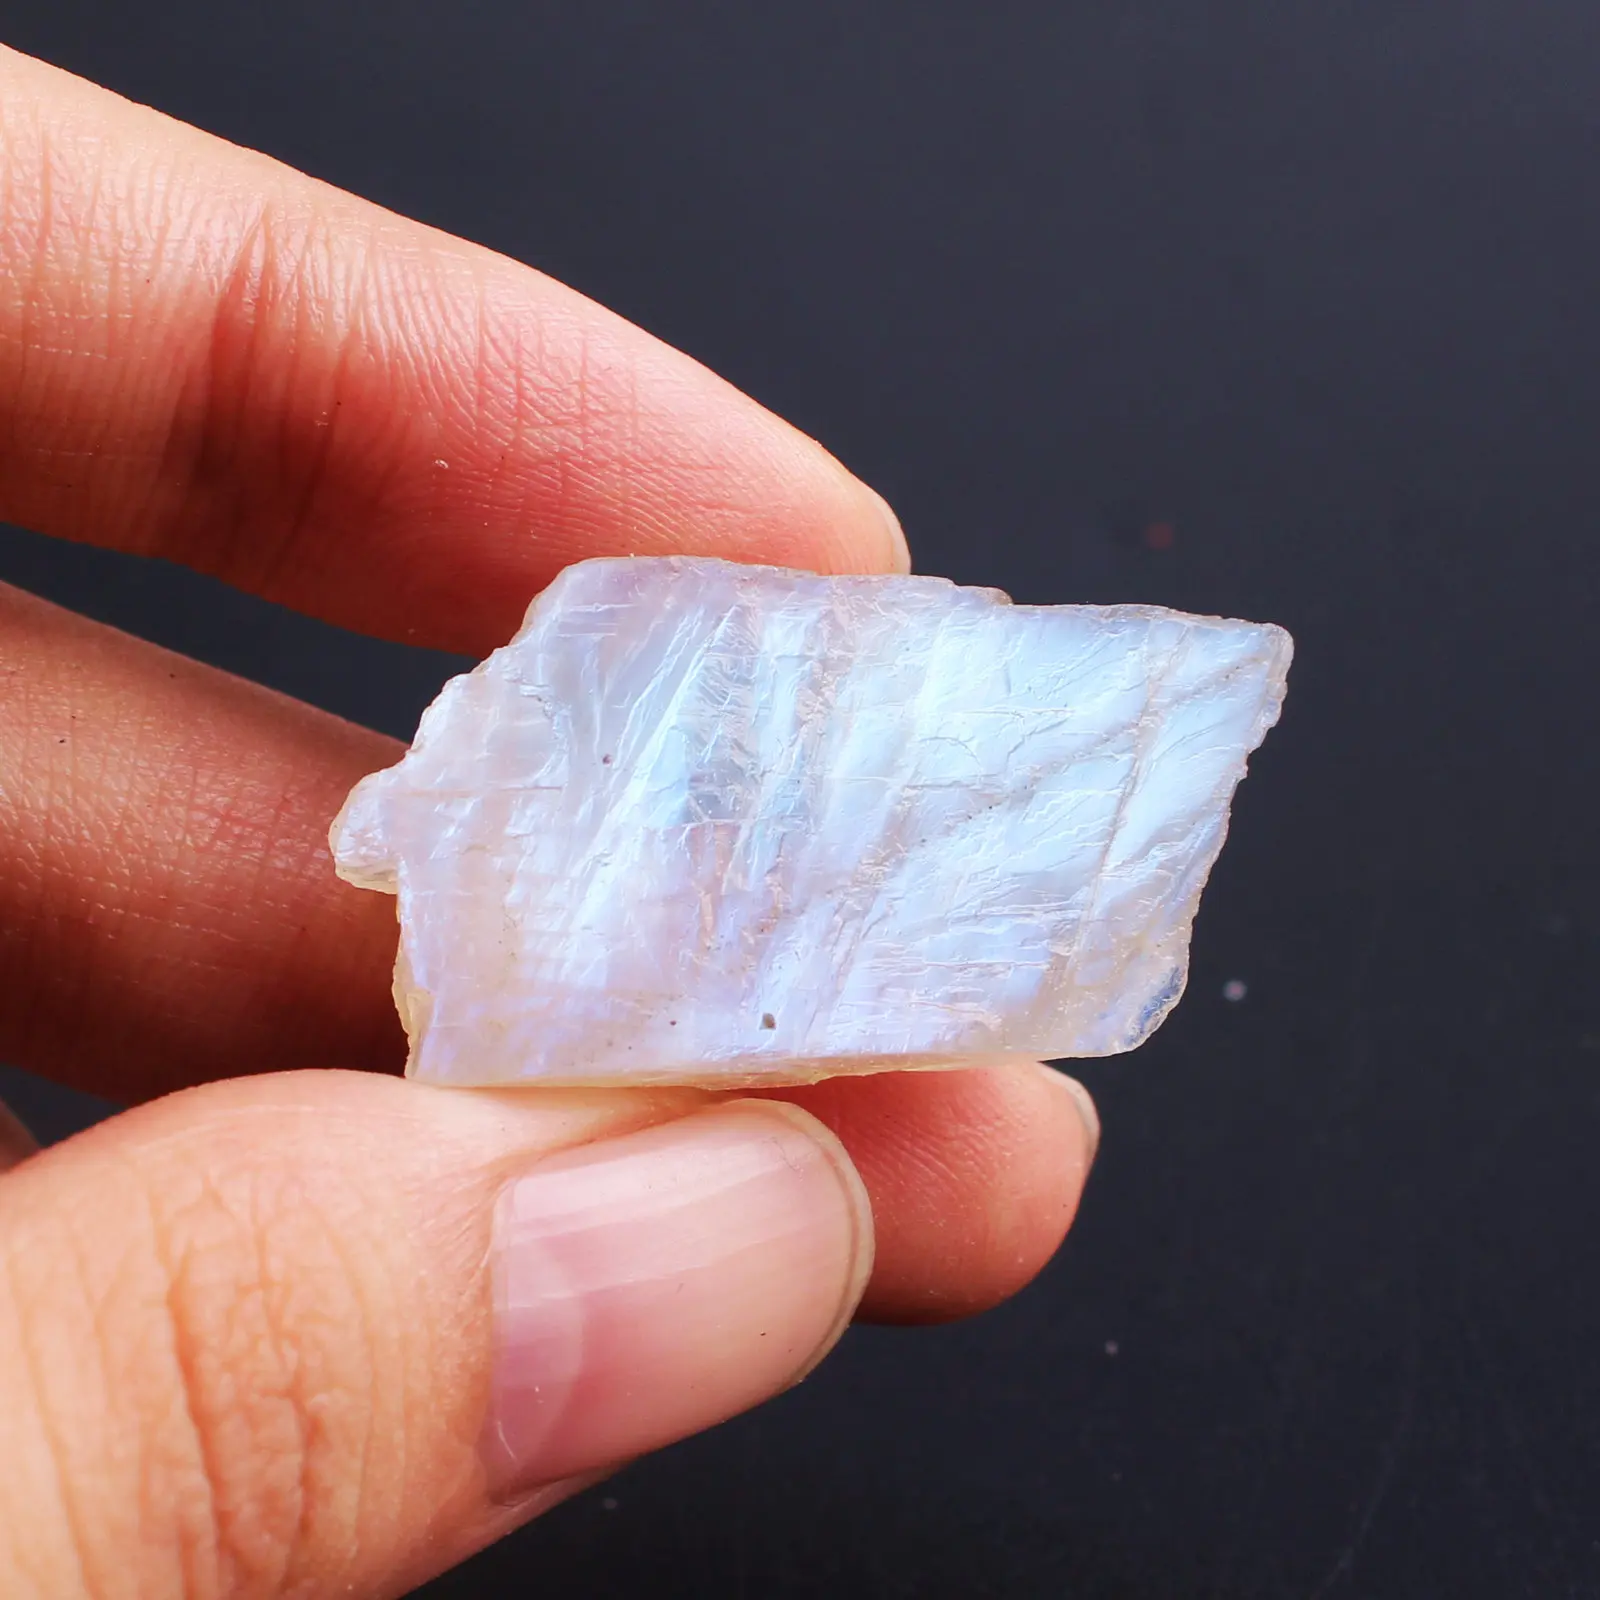 

1PC High Quality Rare Natural White Moonstone Tumbled Stone Crystal Rockstone Reiki healing Specimen Rough Raw Collection